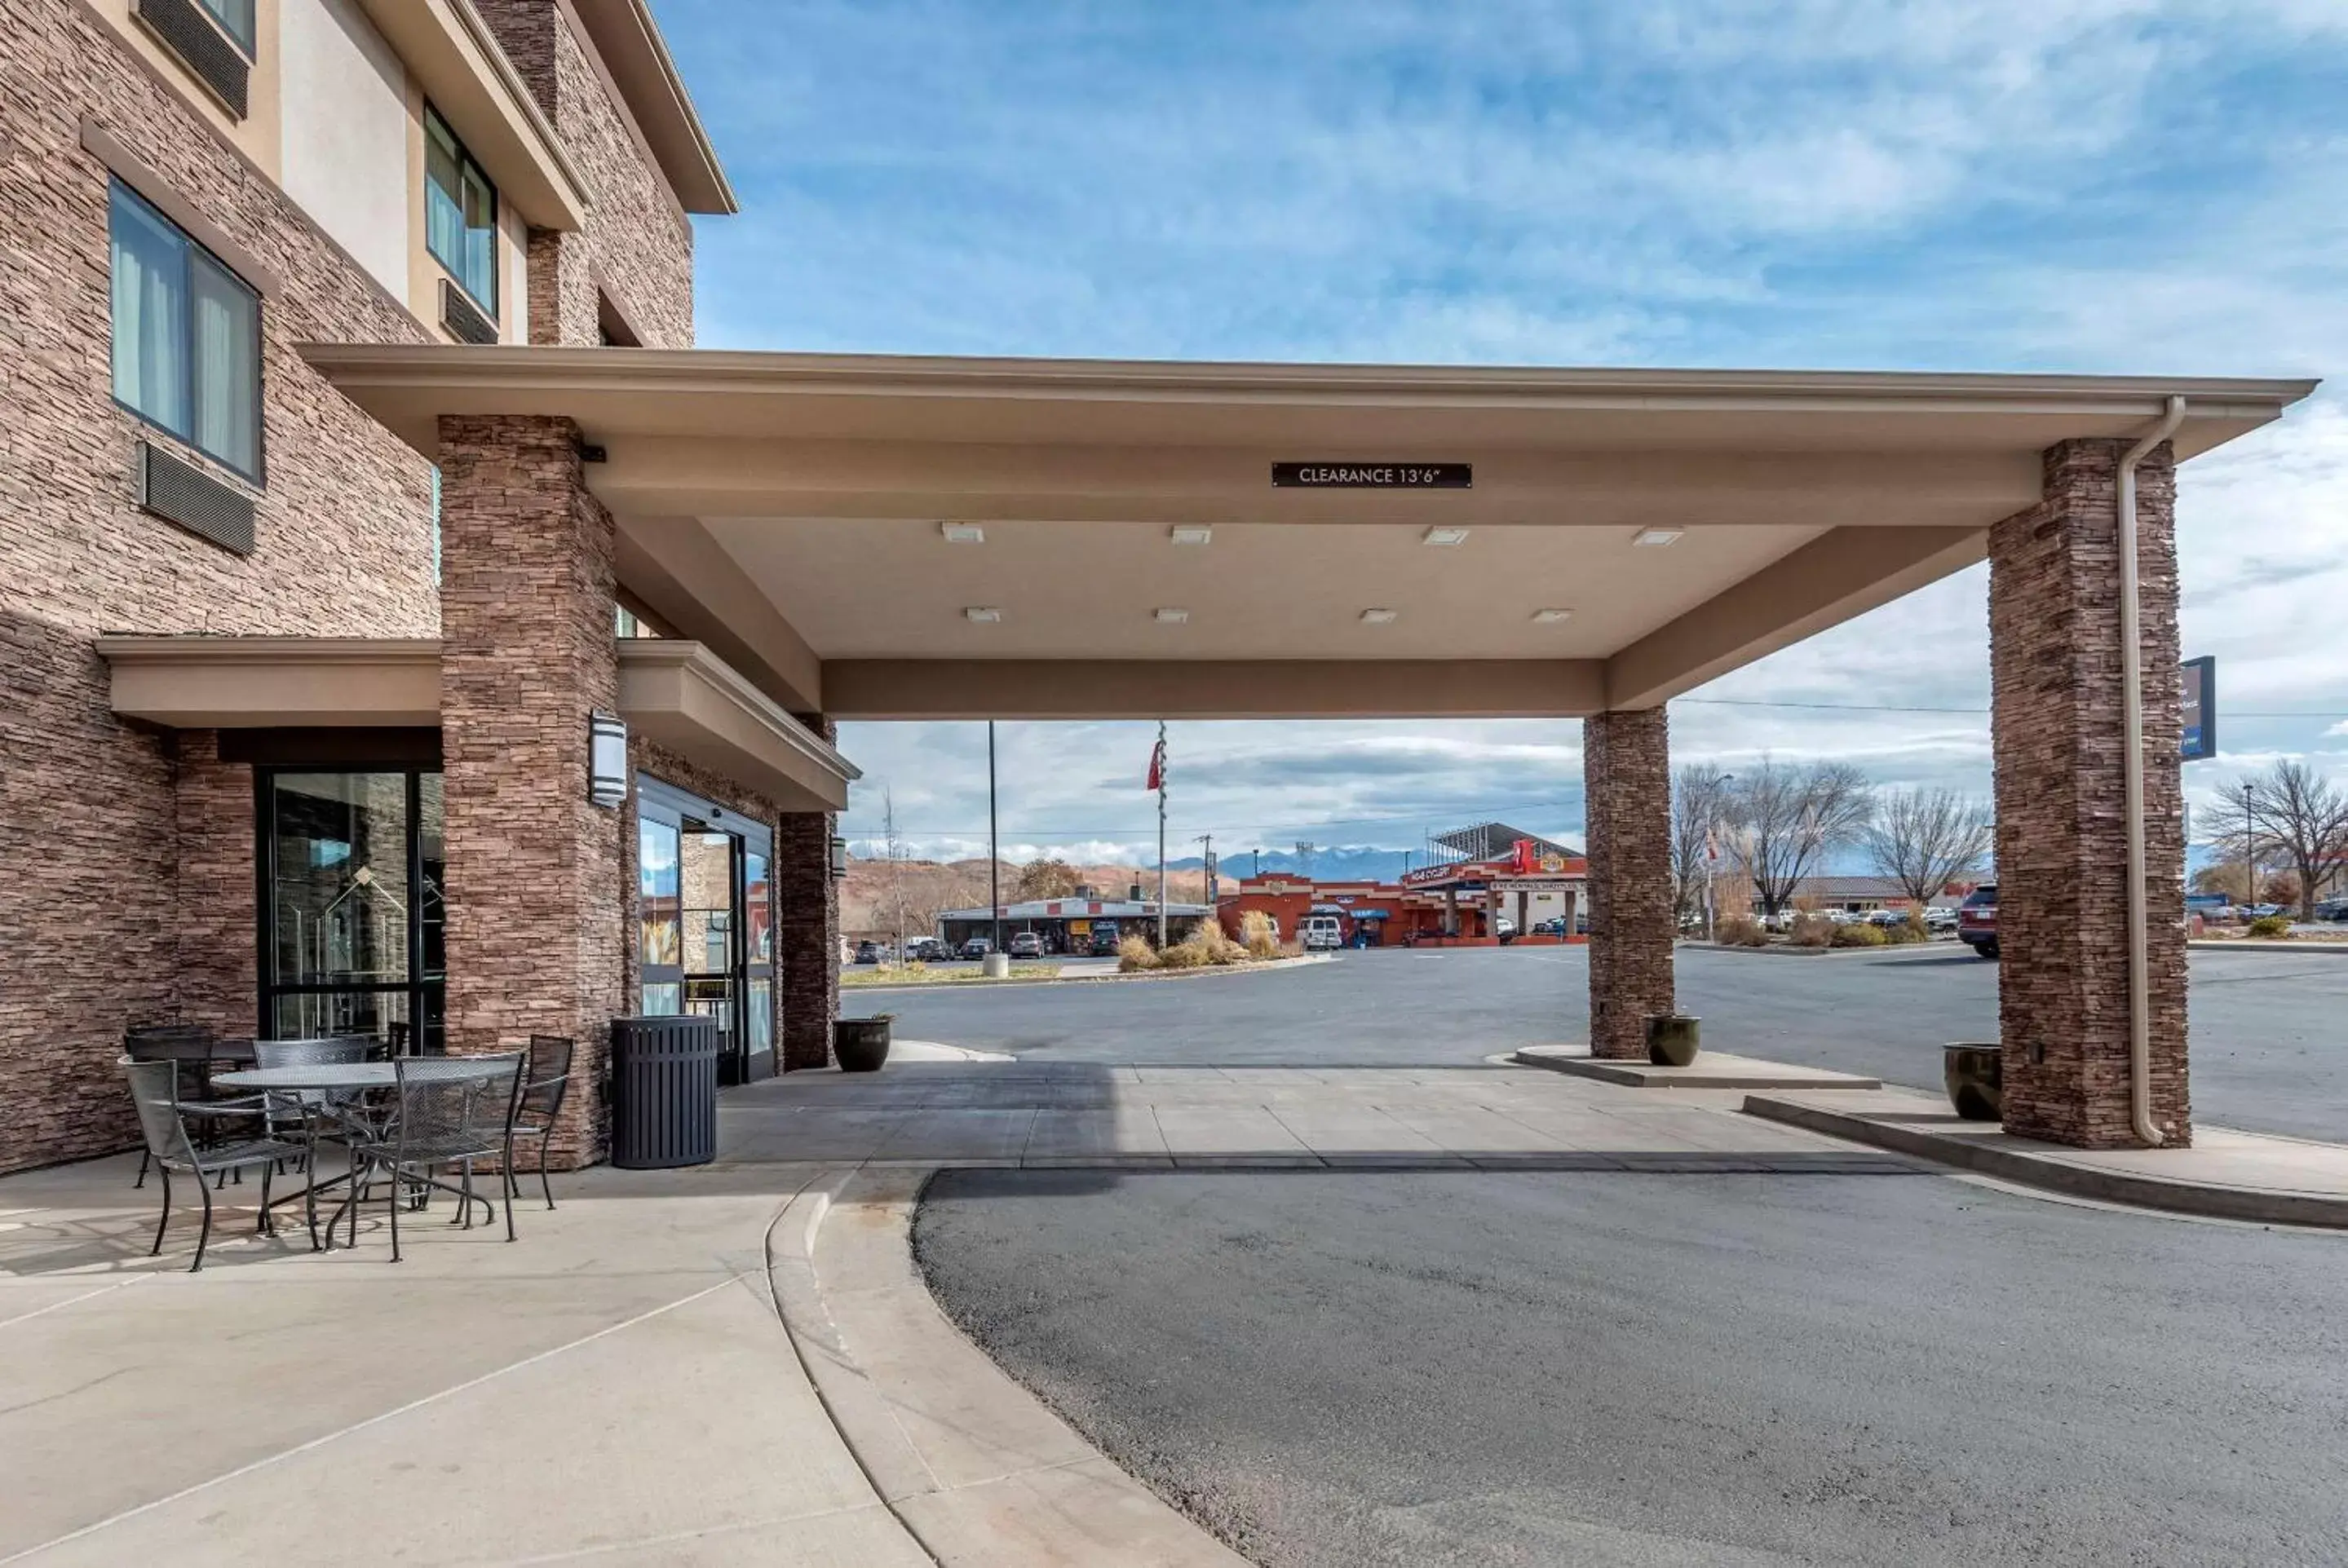 Property building in MainStay Suites Moab near Arches National Park